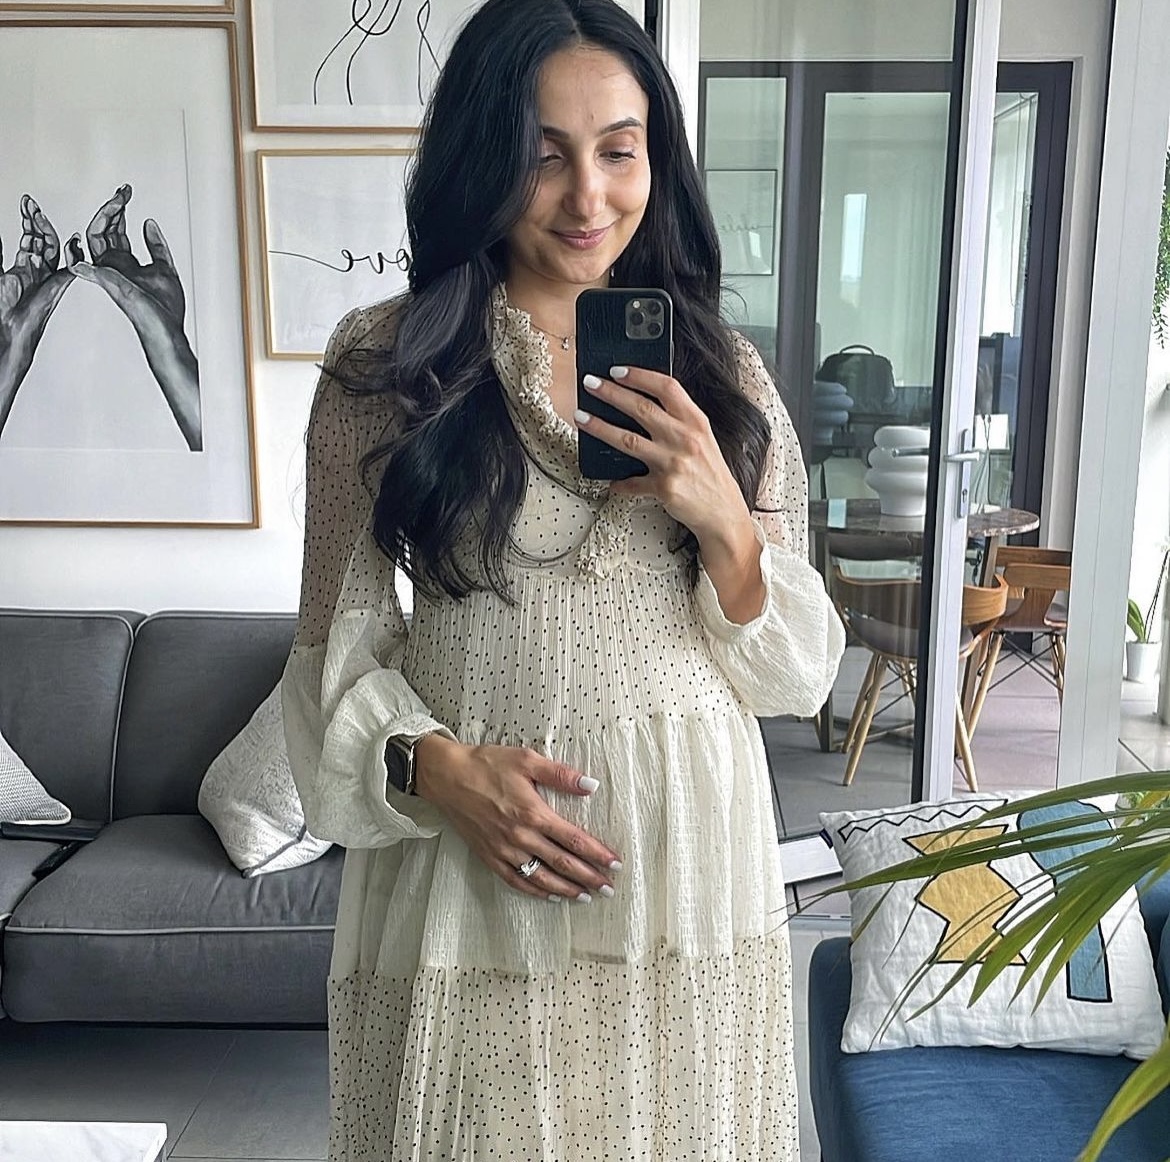 21 Stylish Spring Maternity Outfit Ideas That Don't Look Frumpy